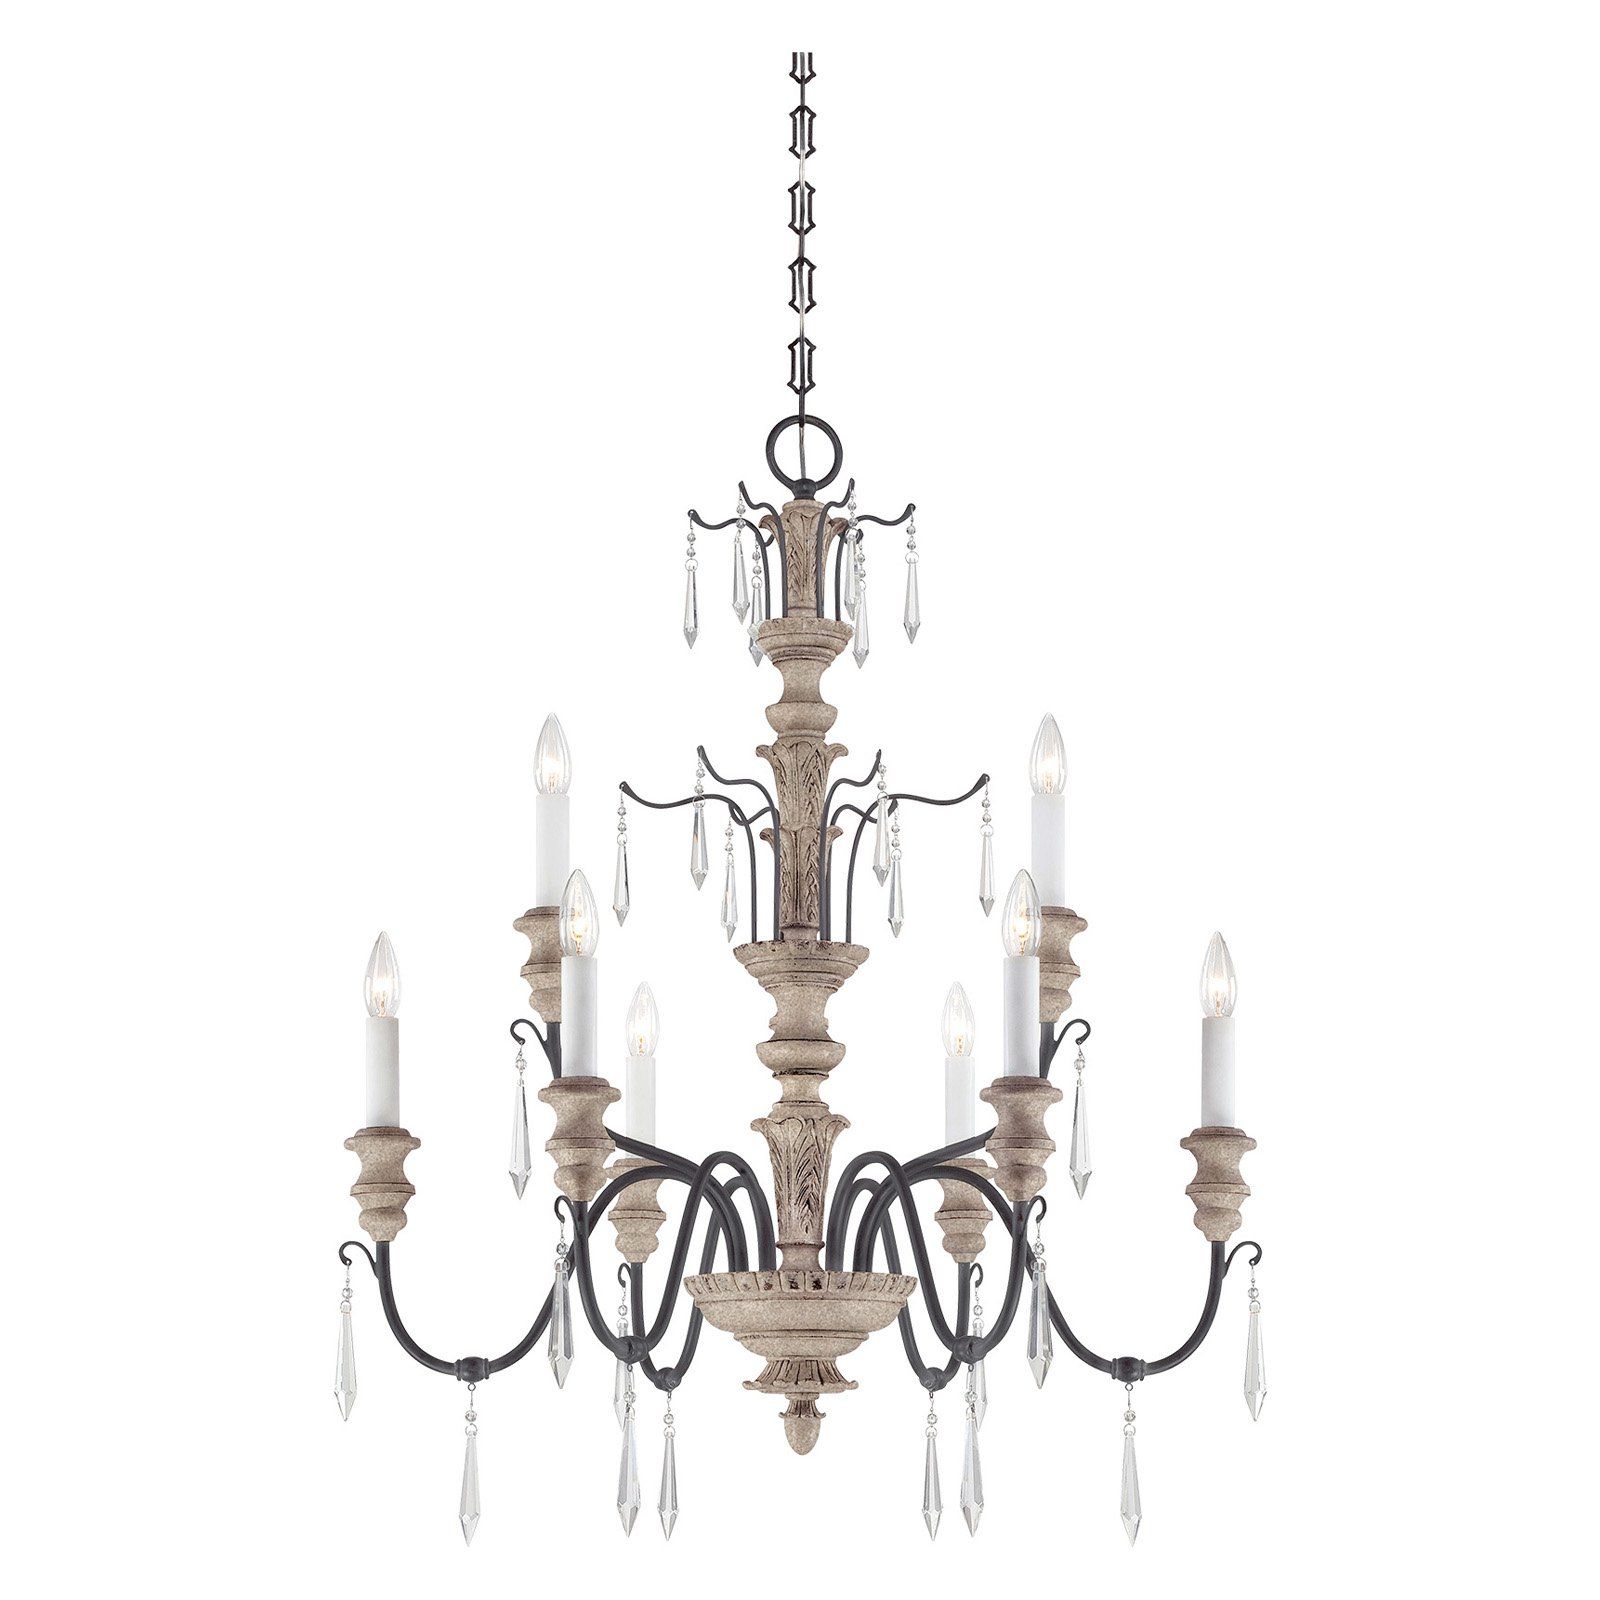 Most Recent Bouchette Traditional 6 Light Candle Style Chandeliers Intended For Savoy House Madeliane 1 4341 6 192 Chandelier (View 8 of 25)